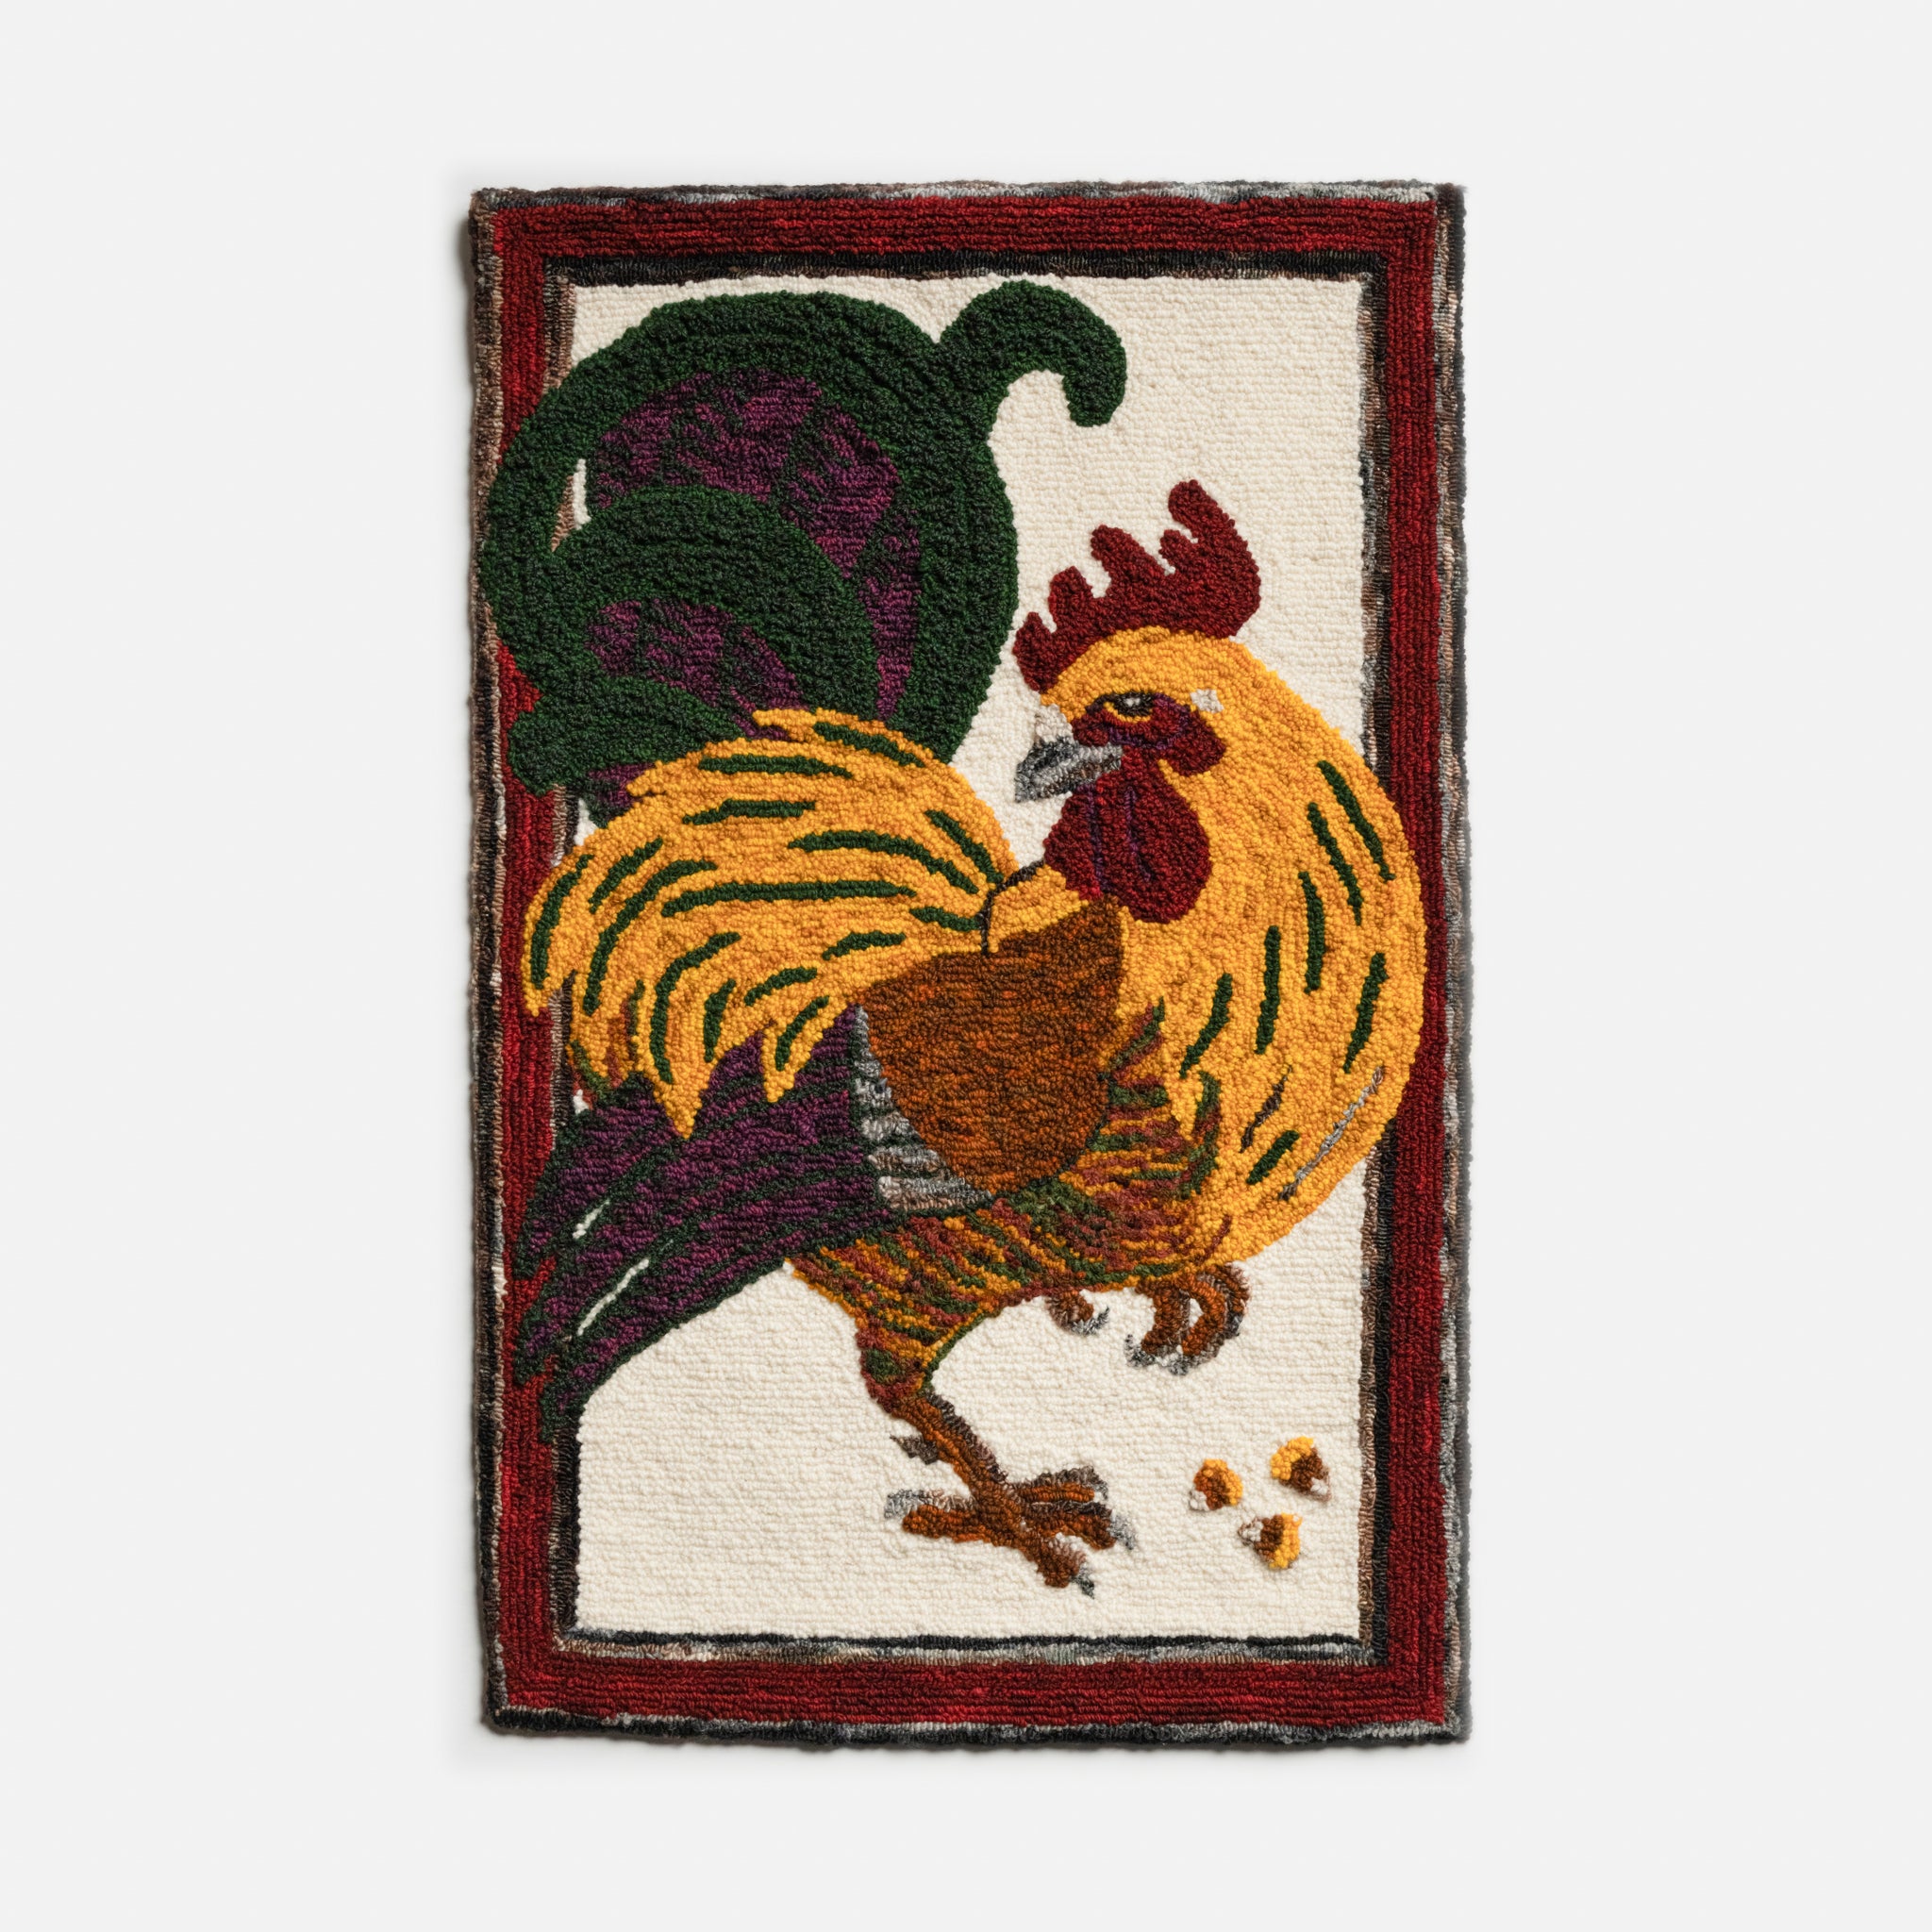 Mr Rooster Tapestry by Laura Berlage